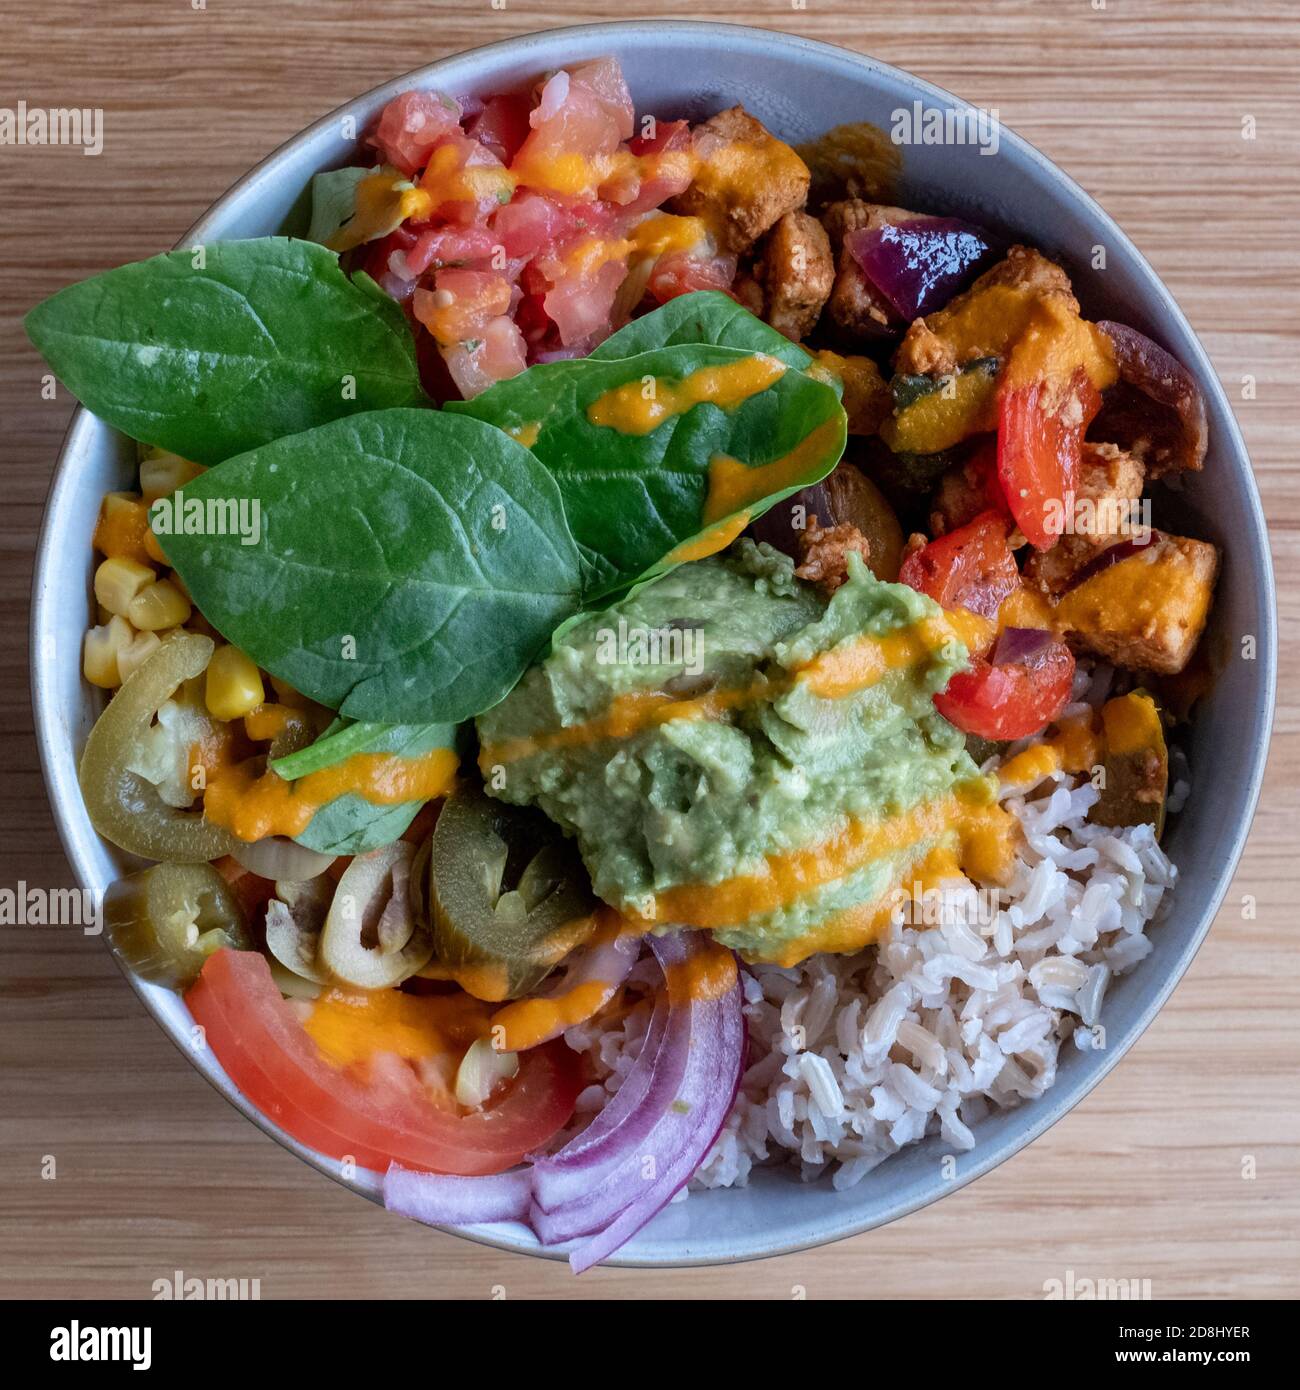 Colourful vegan bowl food with avocado, tomato, spinach leaves. Photographed from above. Stock Photo